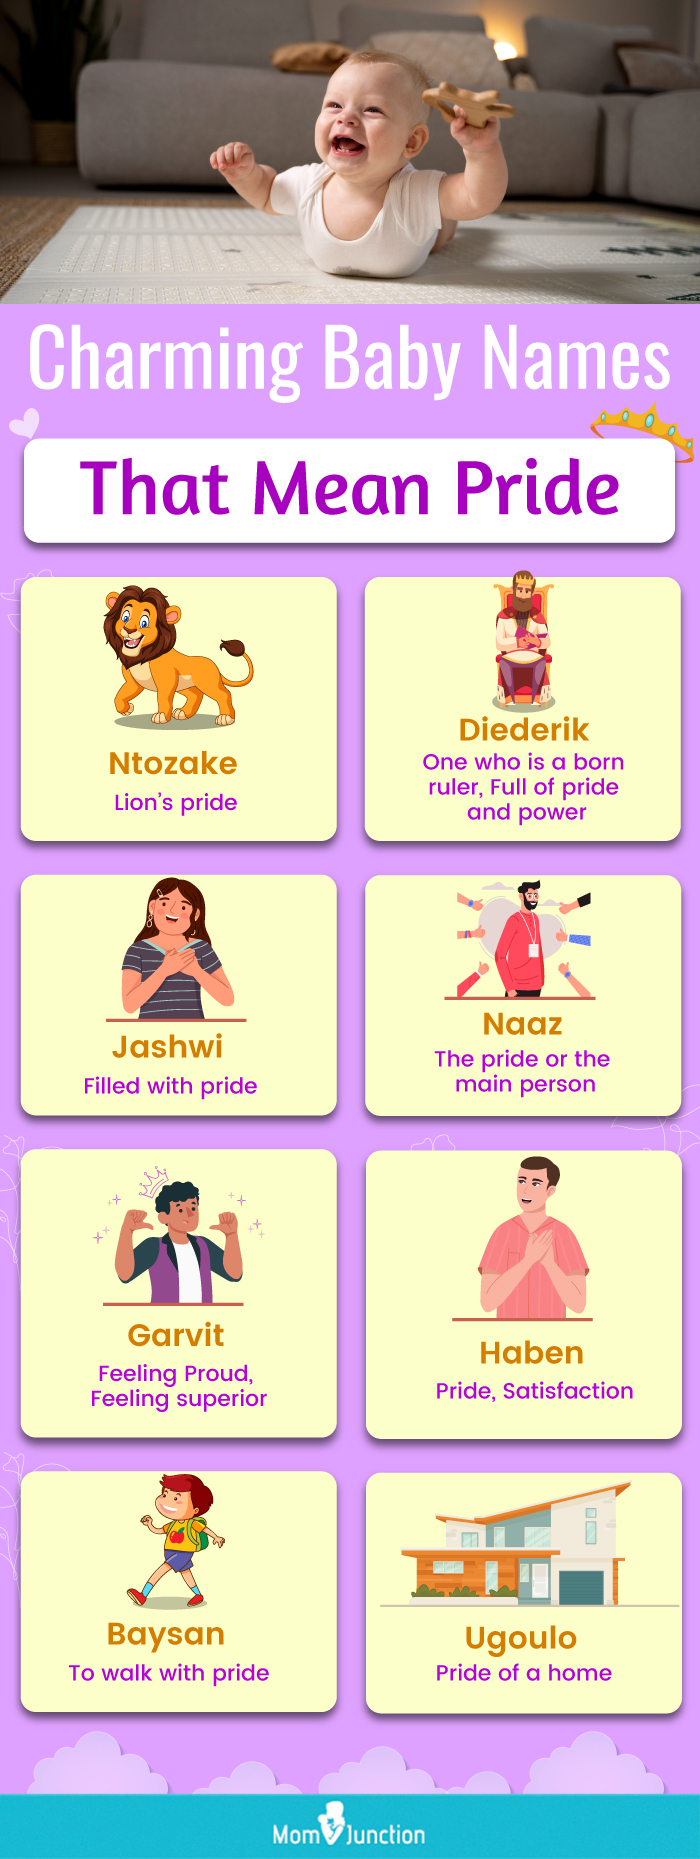 charming baby names that mean pride (infographic)